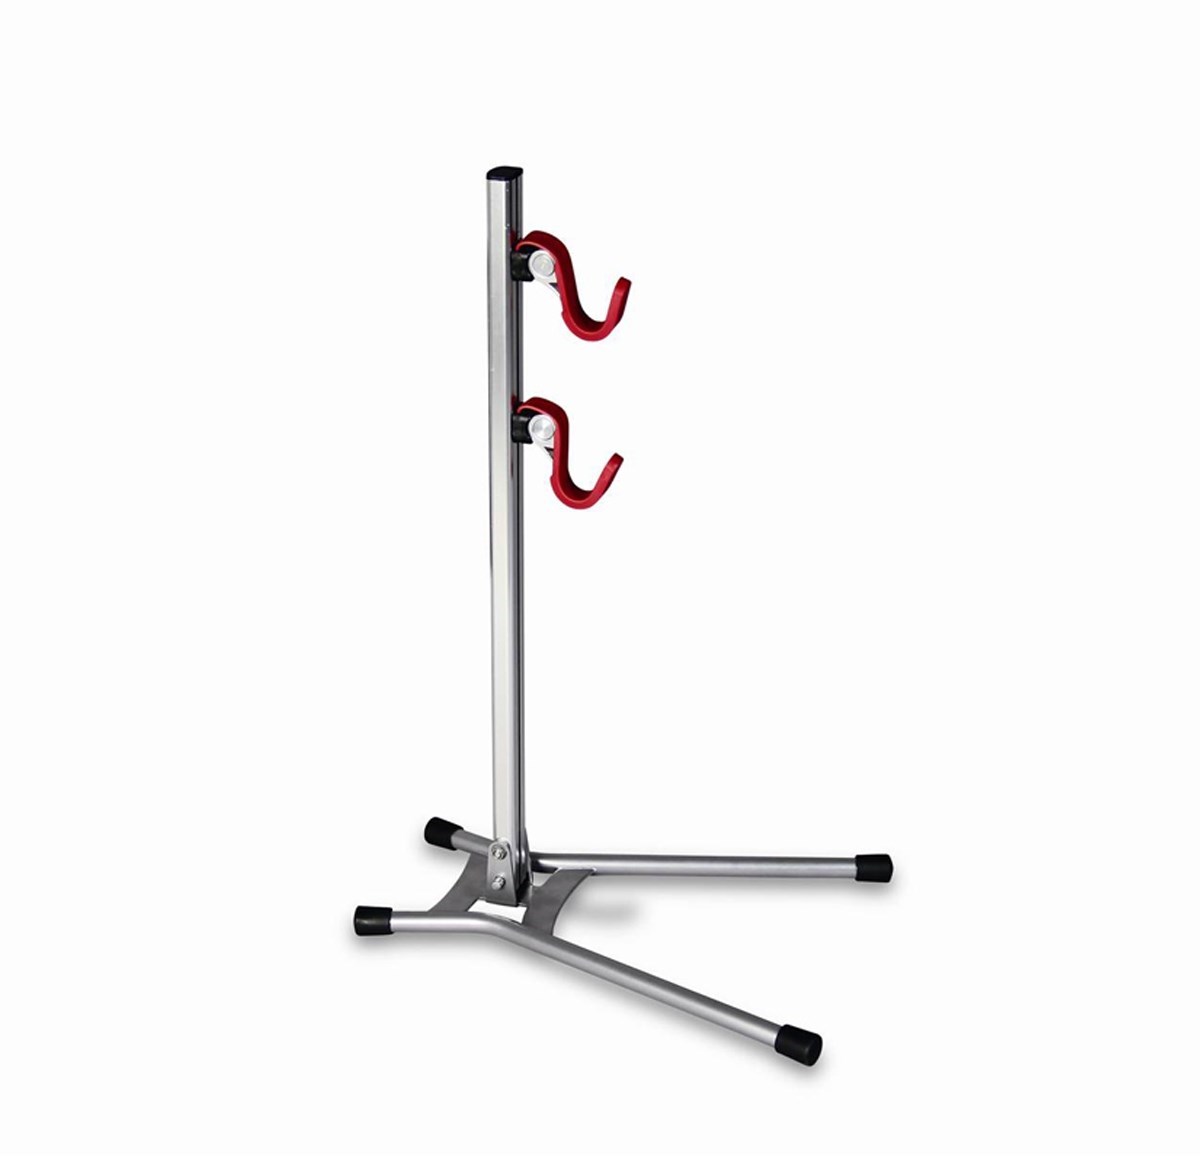 Minoura DS-530 Display Stand product image